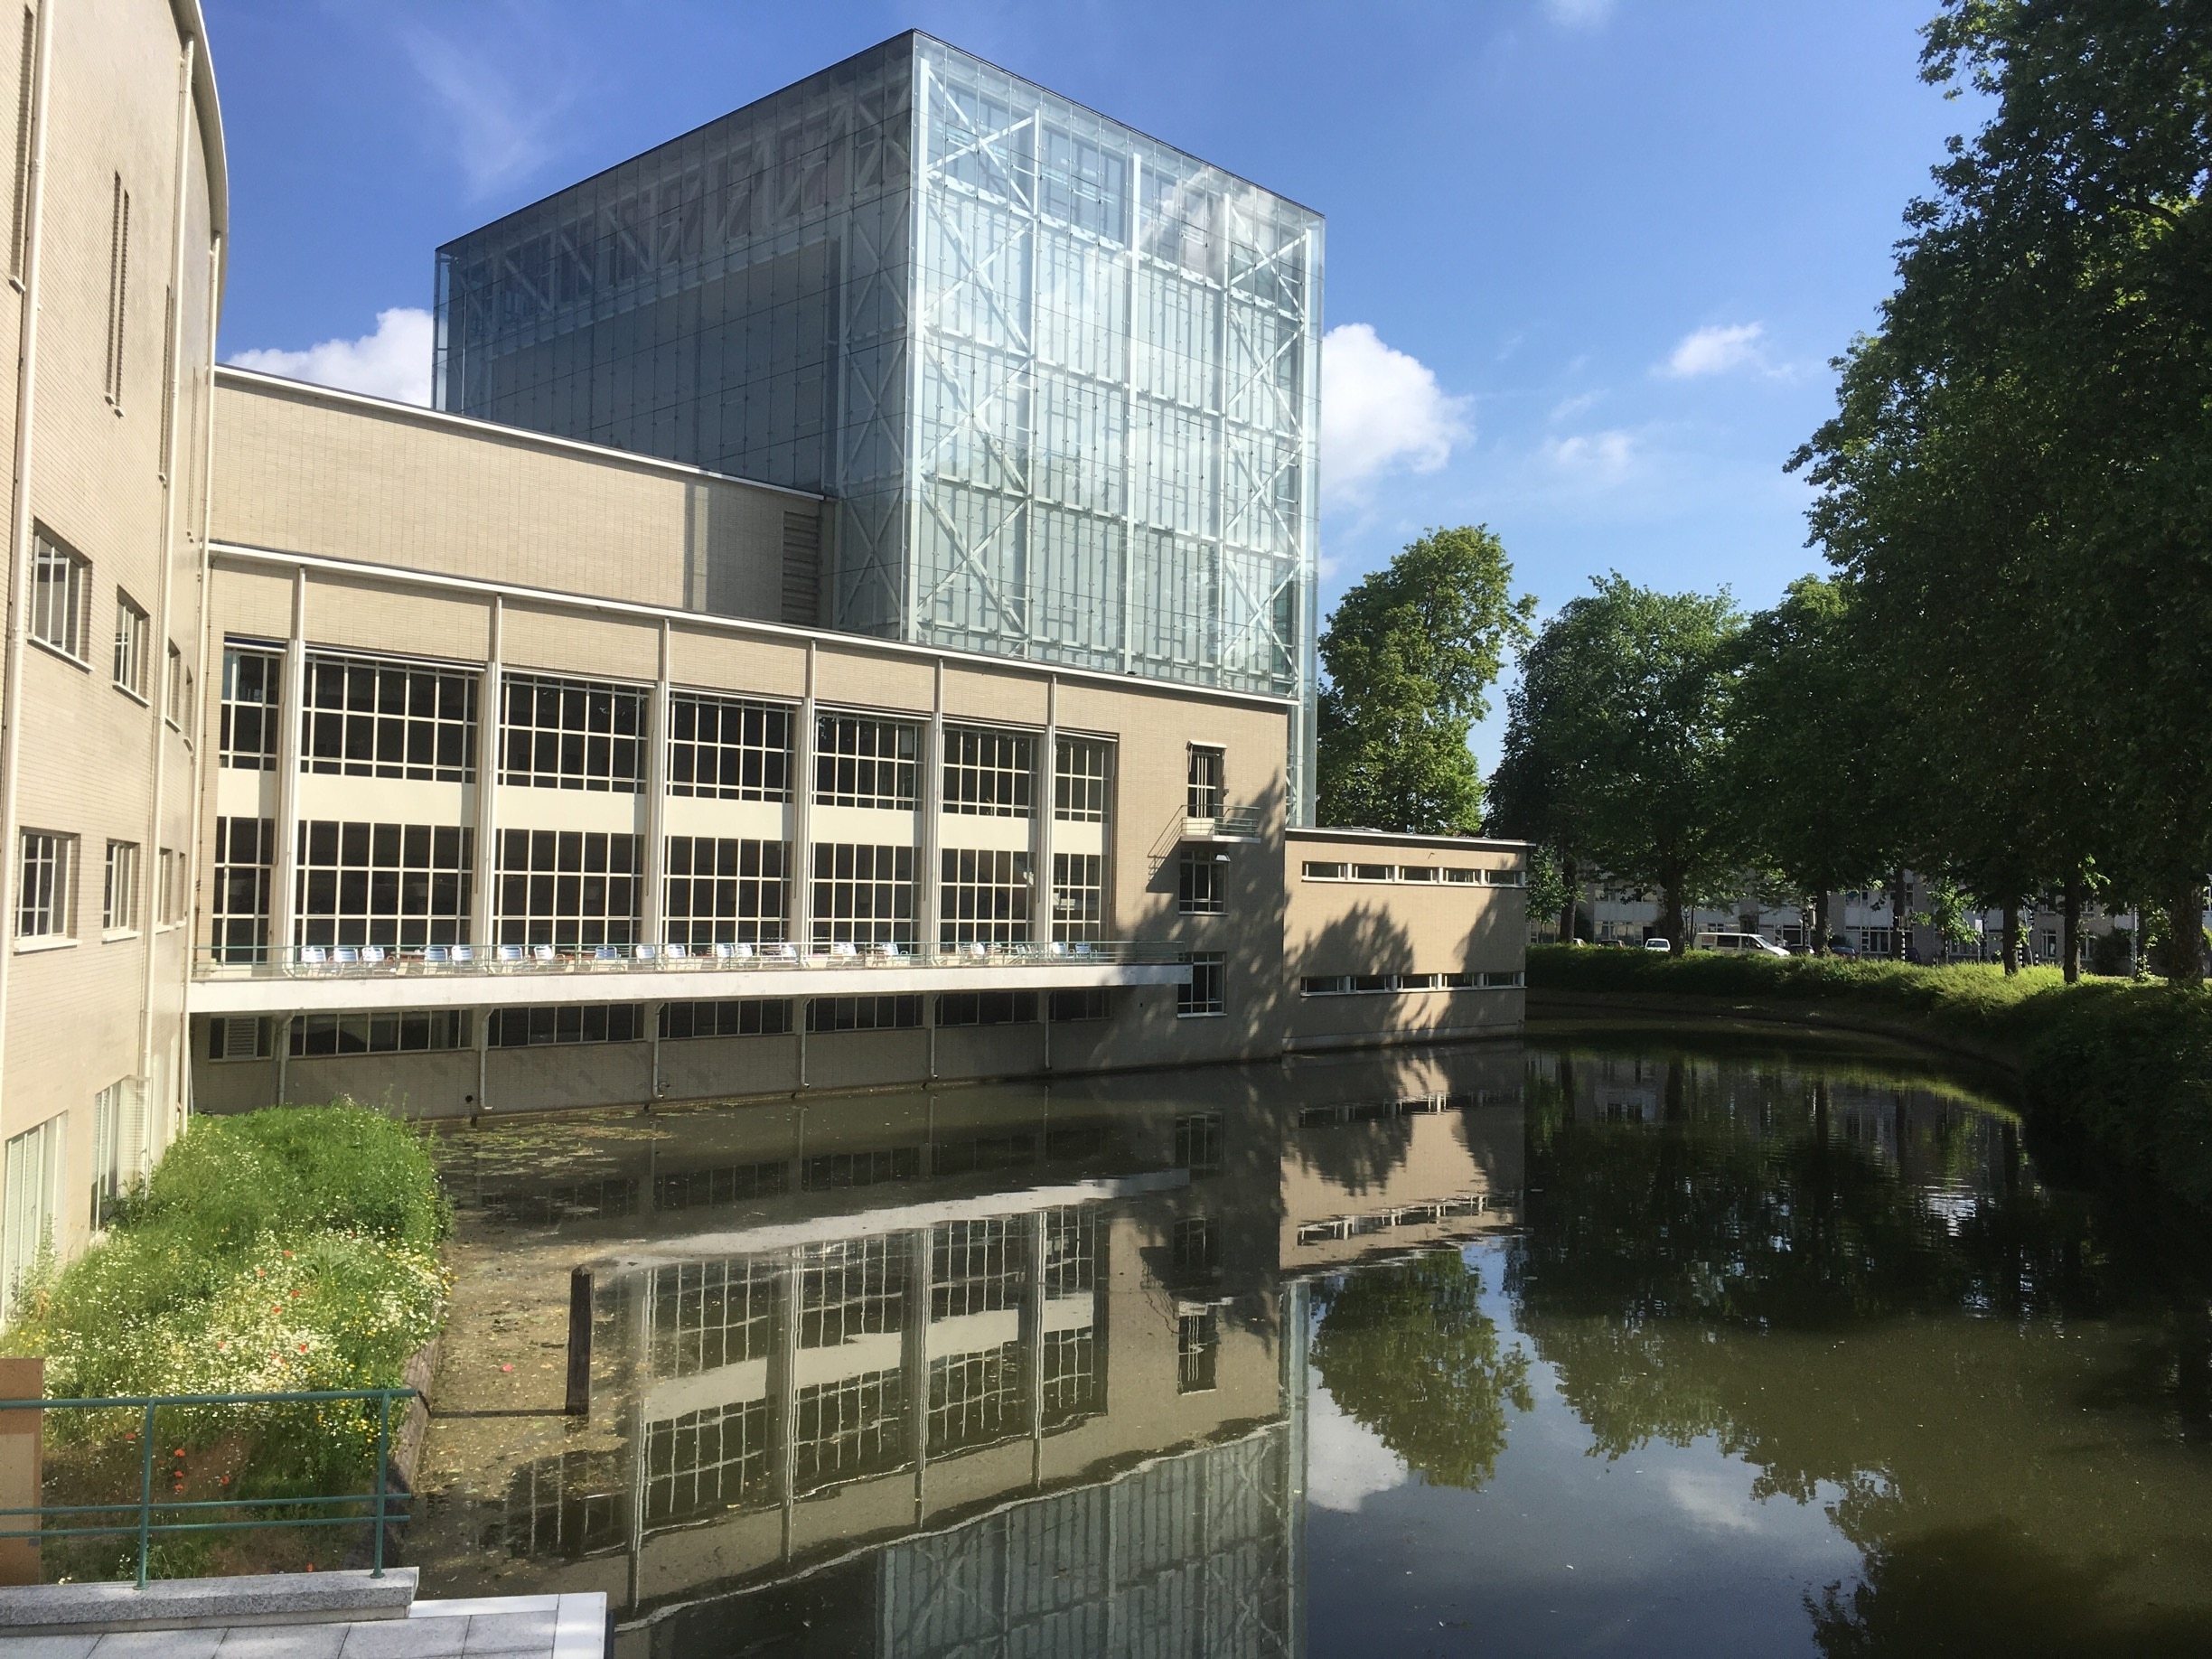 Once you admire the architecture of this theater from a nearby bridge, it suddenly is so obvious that the pond is an integral part of the Dudokian design. 

https://www.stadsschouwburg-utrecht.nl/informatie/architect/

https://en.m.wikipedia.org/wiki/Willem_Marinus_Dudok